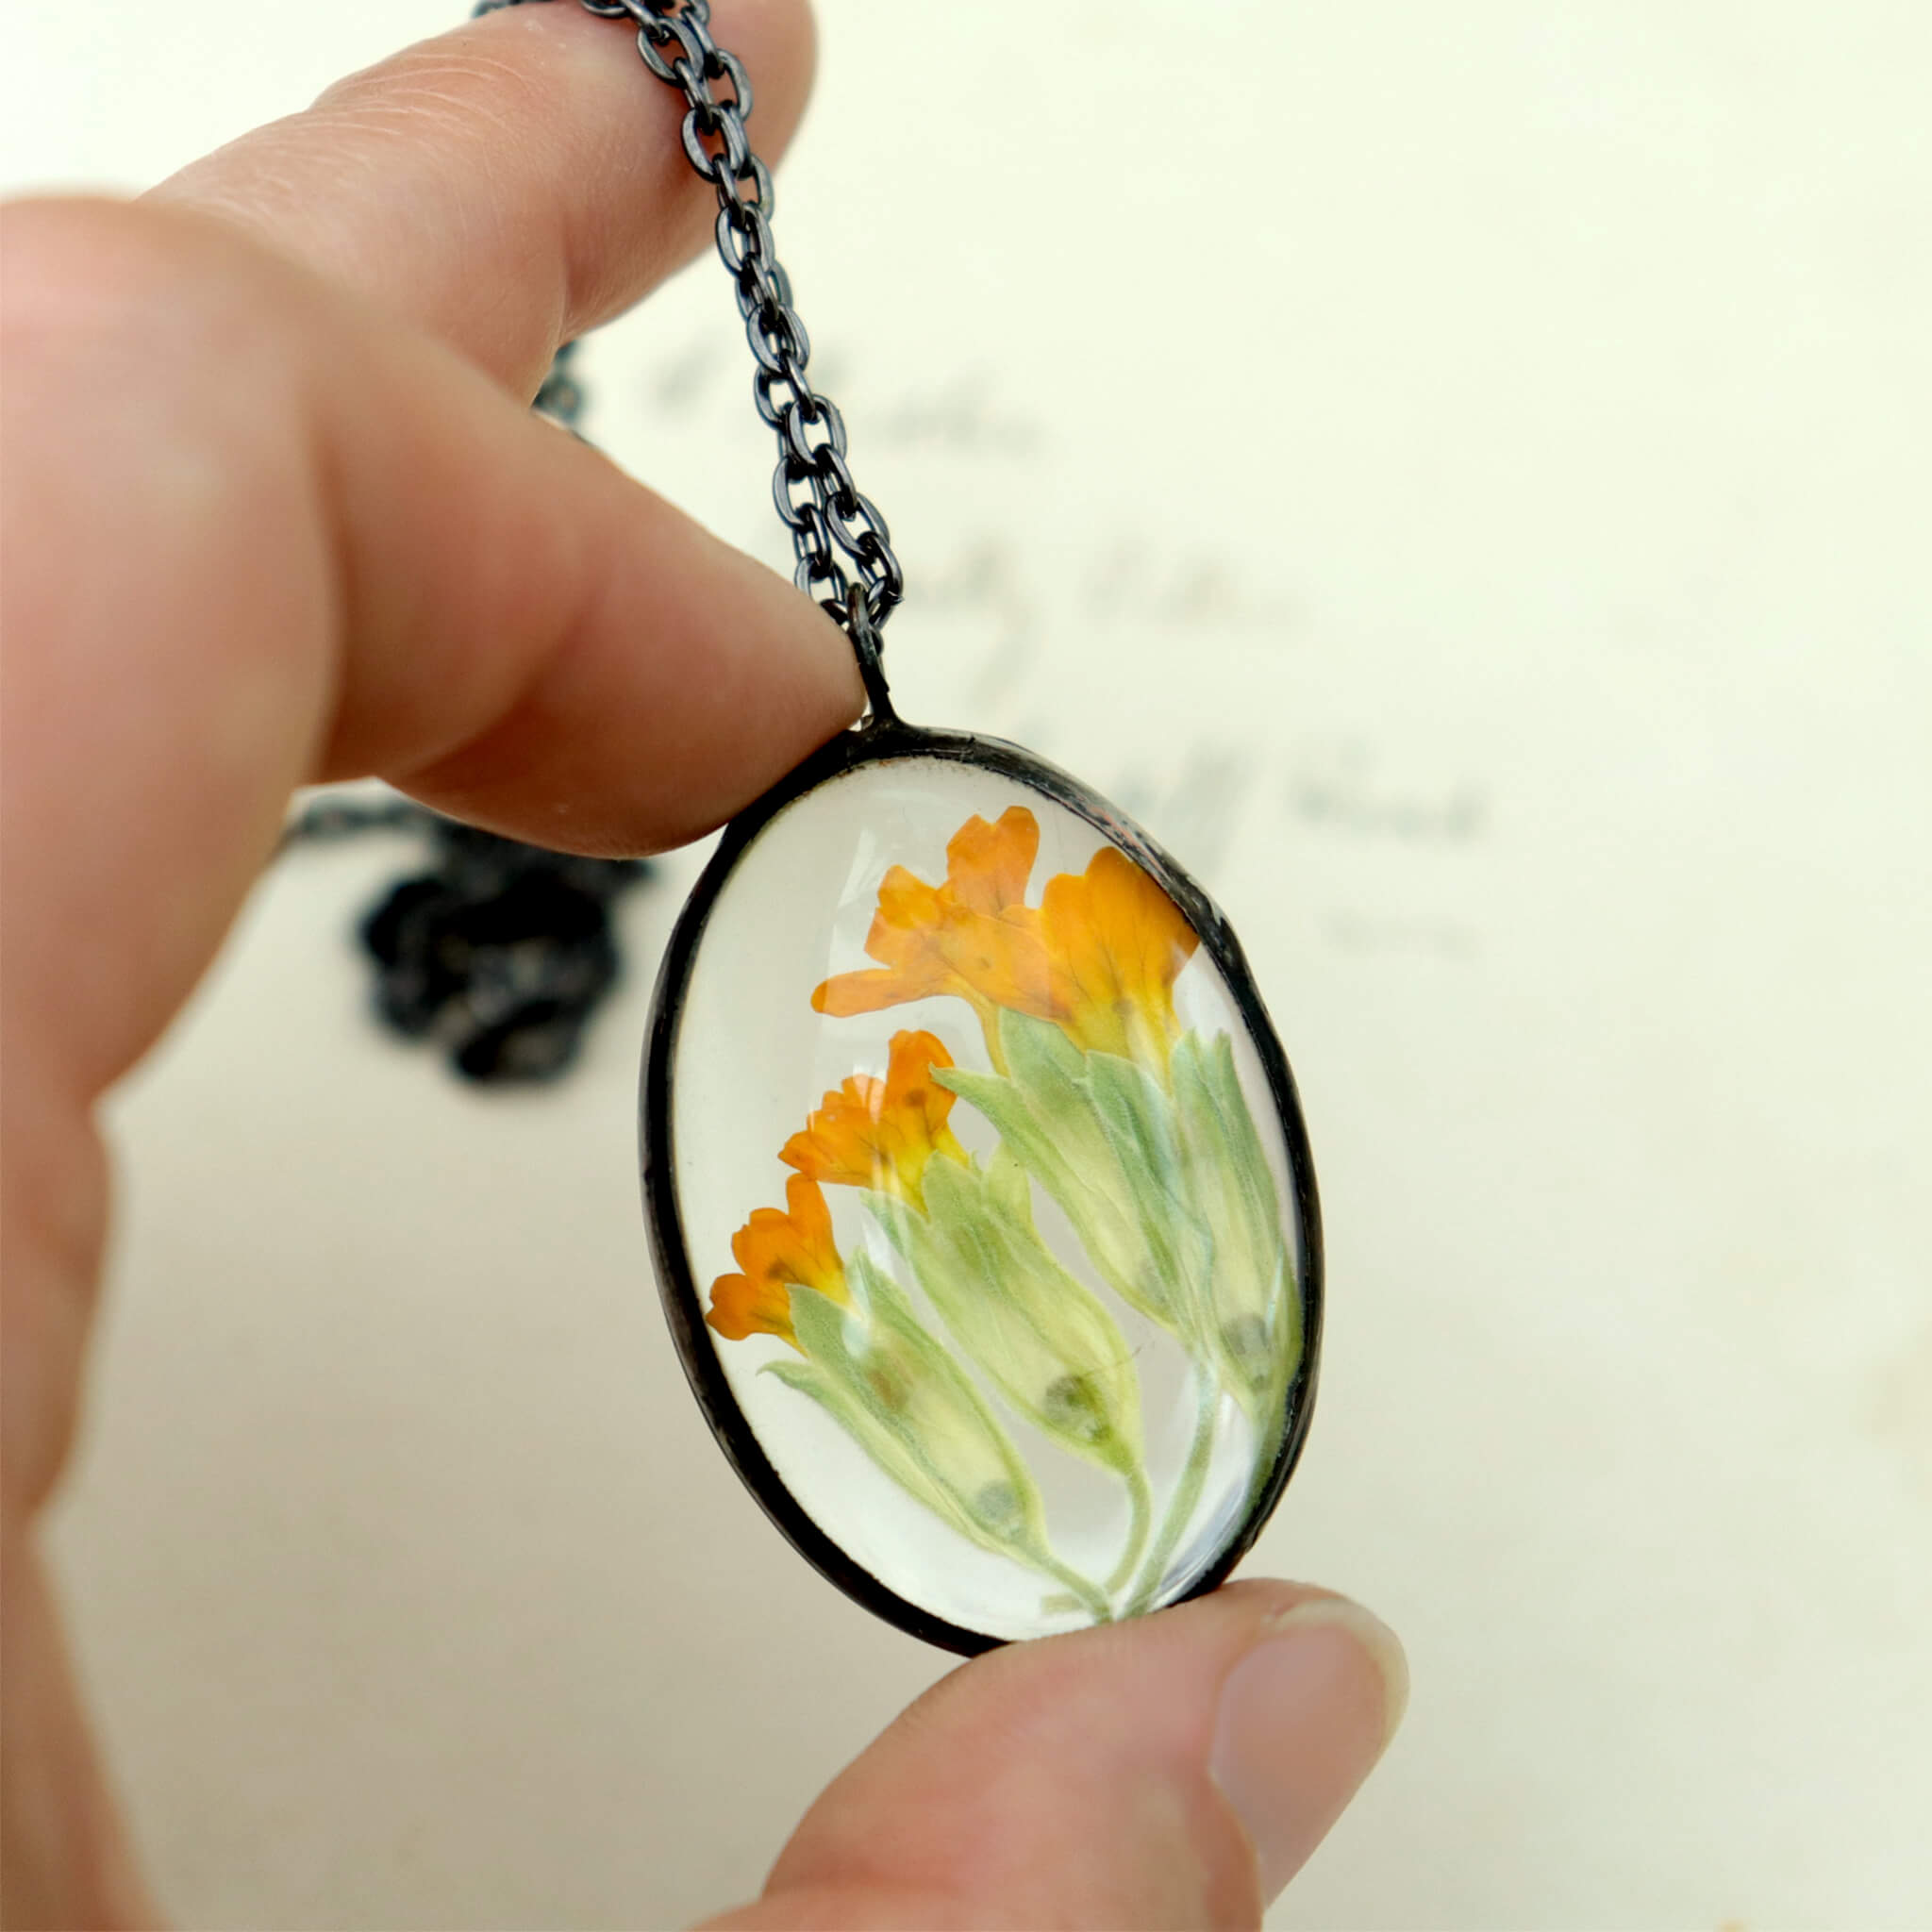 Hand holding soldered glass necklace with primrose flowers